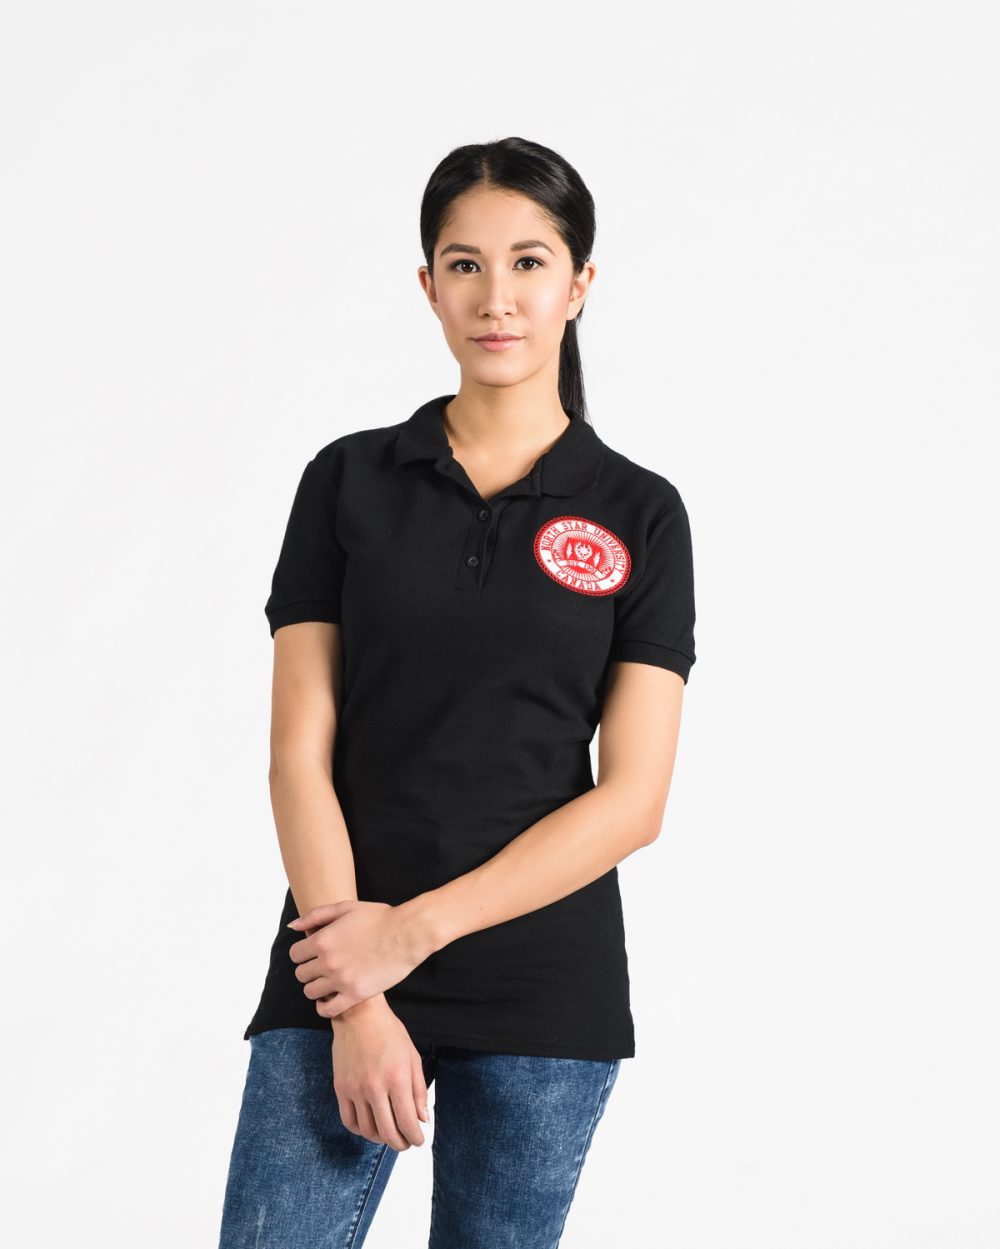 Signature Fitted Golf Shirt 109w in black on woman.